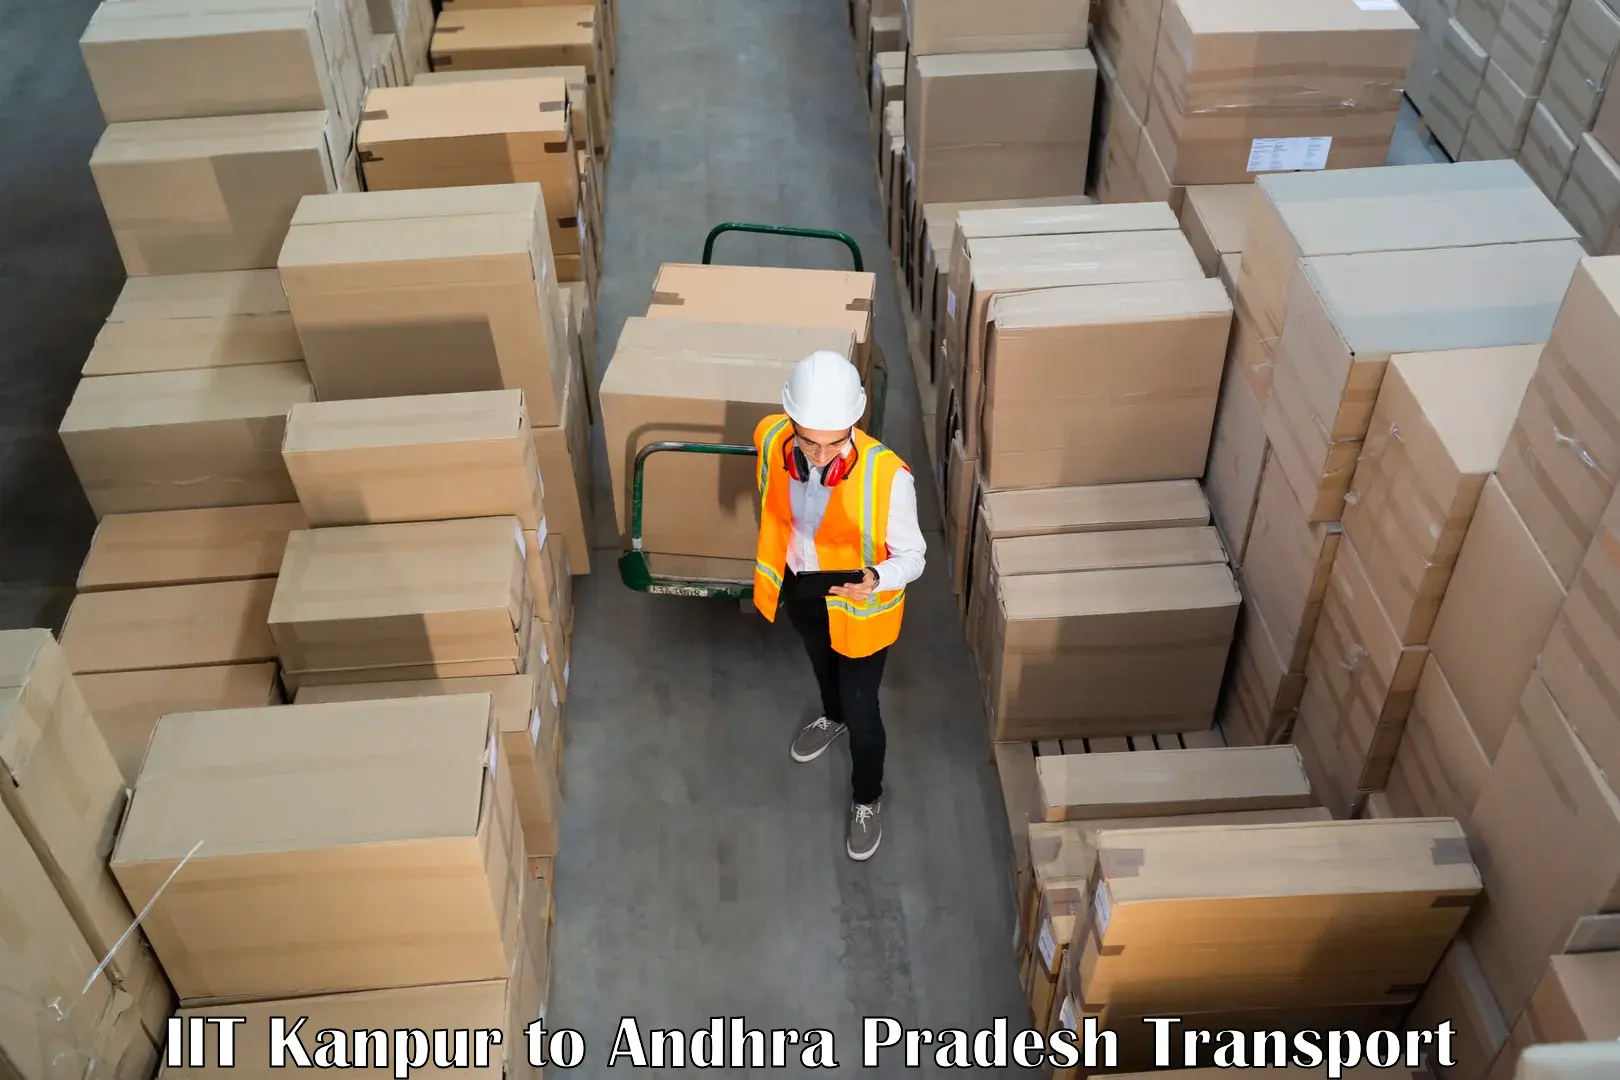 Daily parcel service transport IIT Kanpur to Addateegala